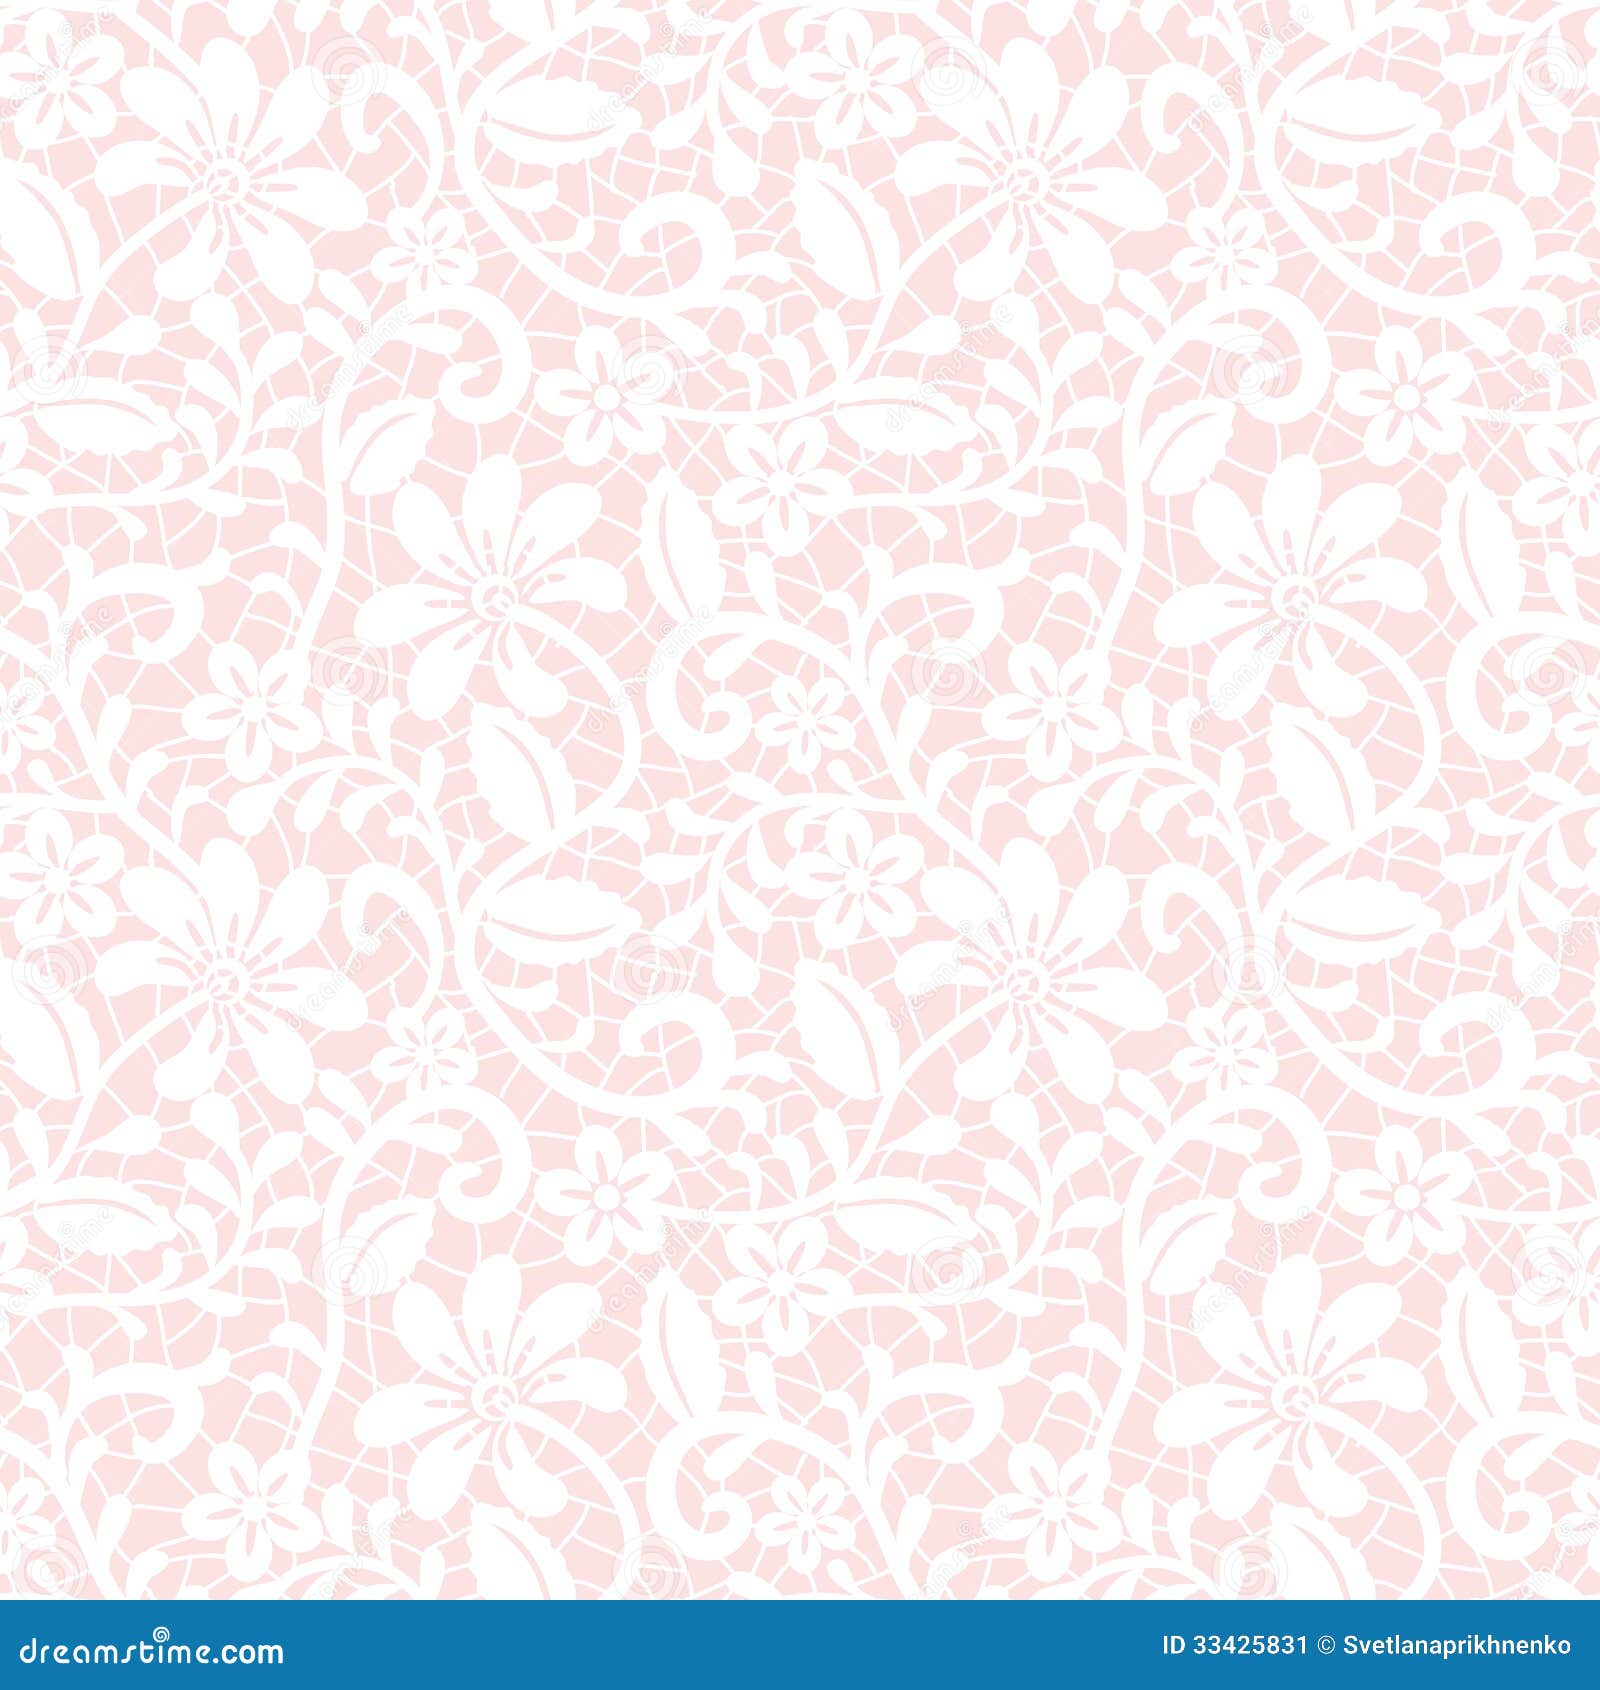 Floral lace pattern stock vector. Illustration of retro ...